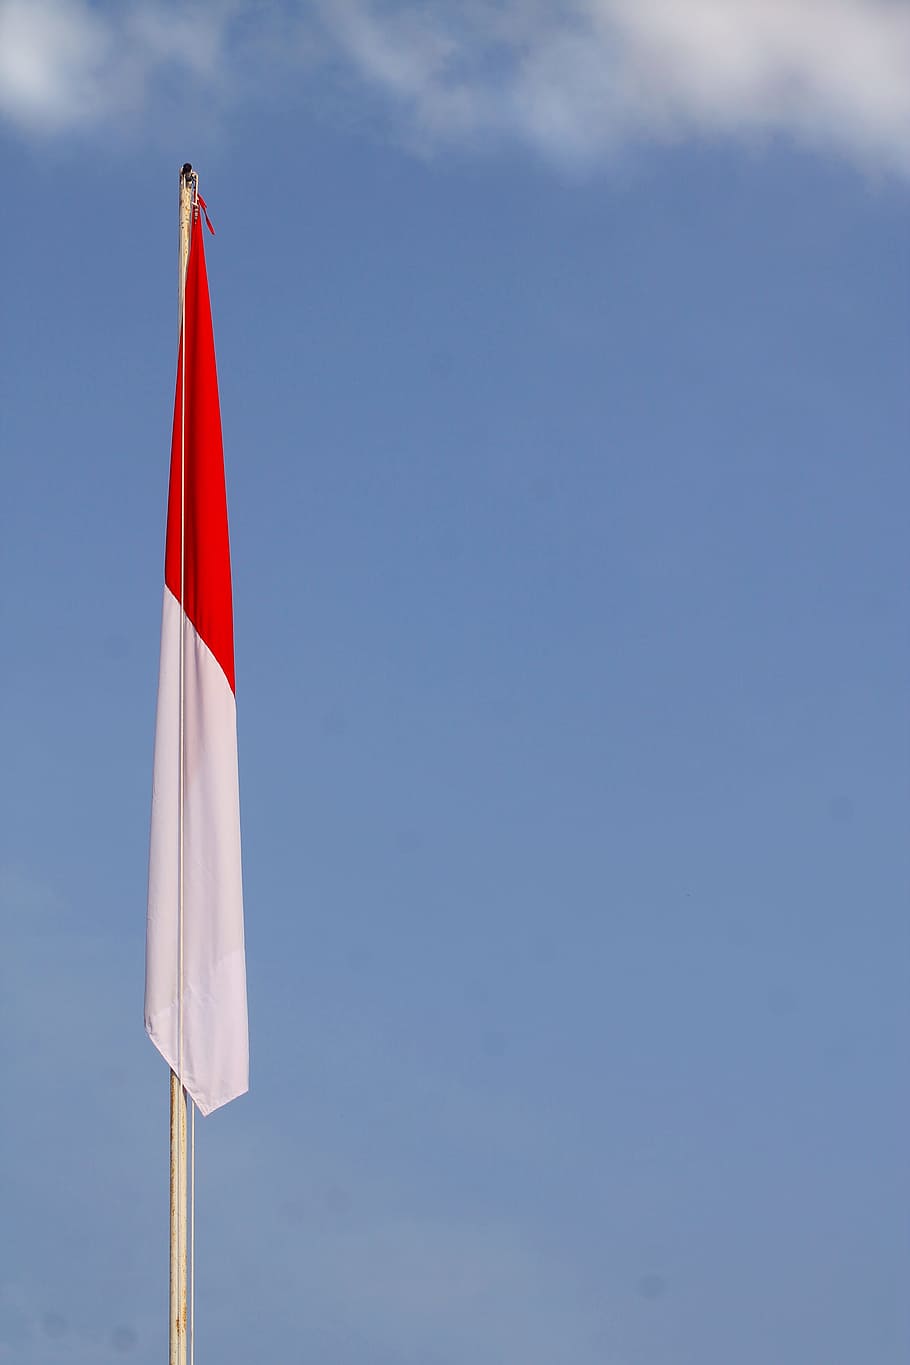 white and red flag mounted in pole under clear blue sky, Indonesia